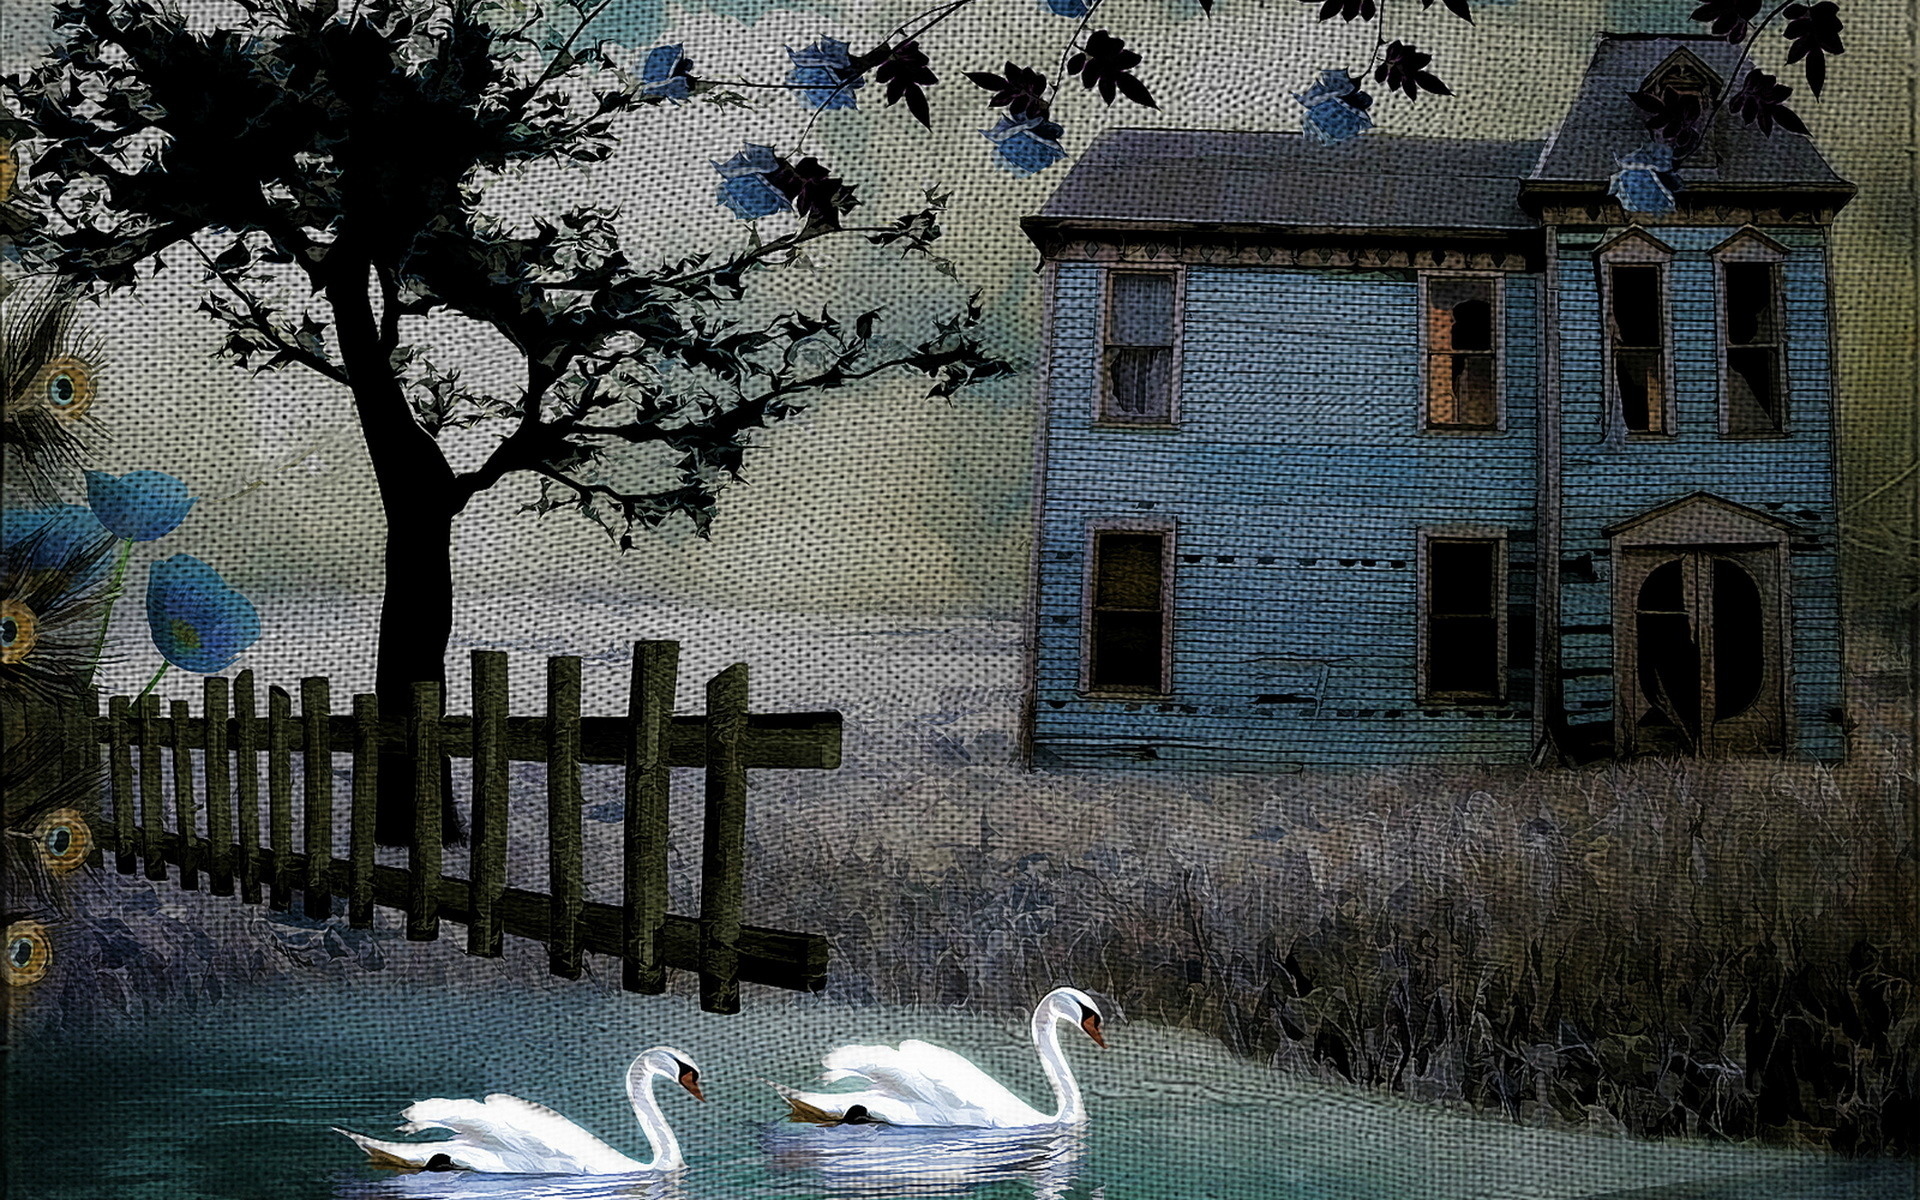 painting, Art, Texture, Rustic, Birds, Swan, Fence, House, Buildings, Architecture, Trees Wallpaper